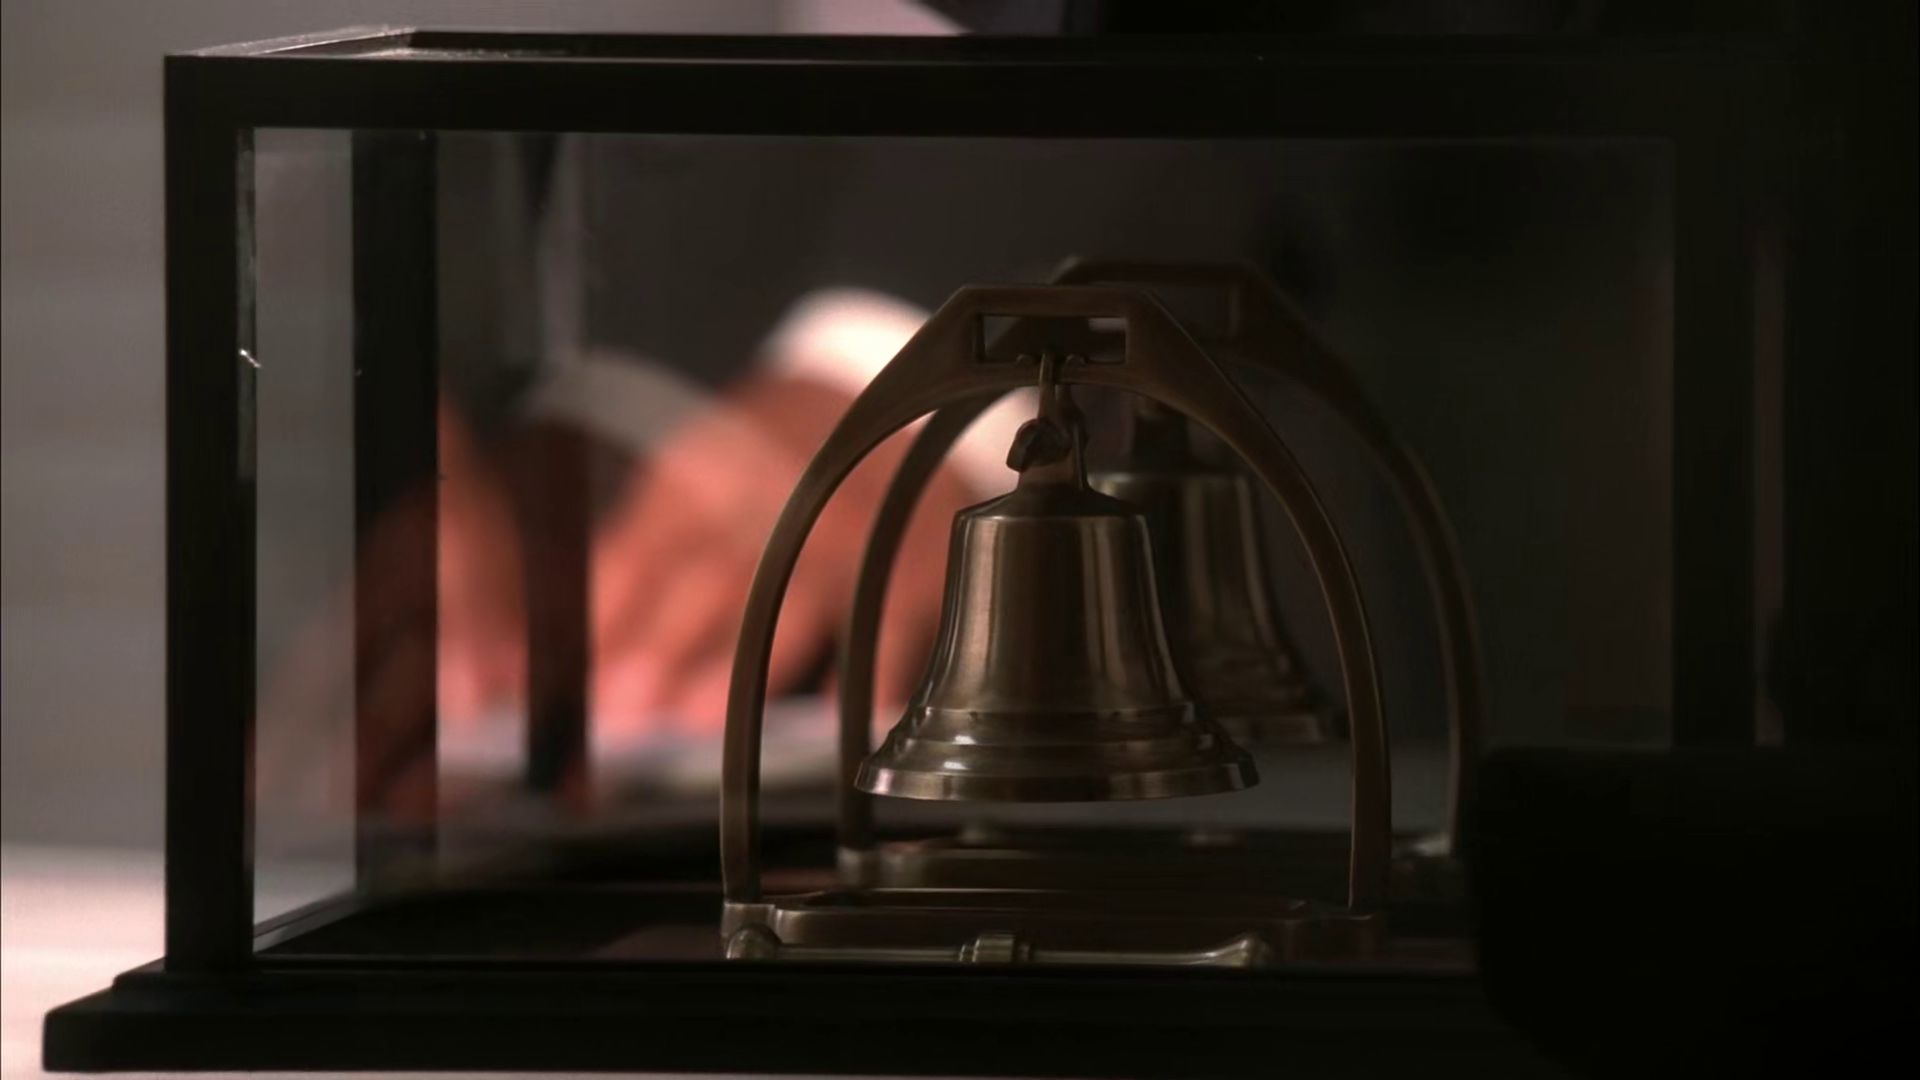 Connection: Nina's bell